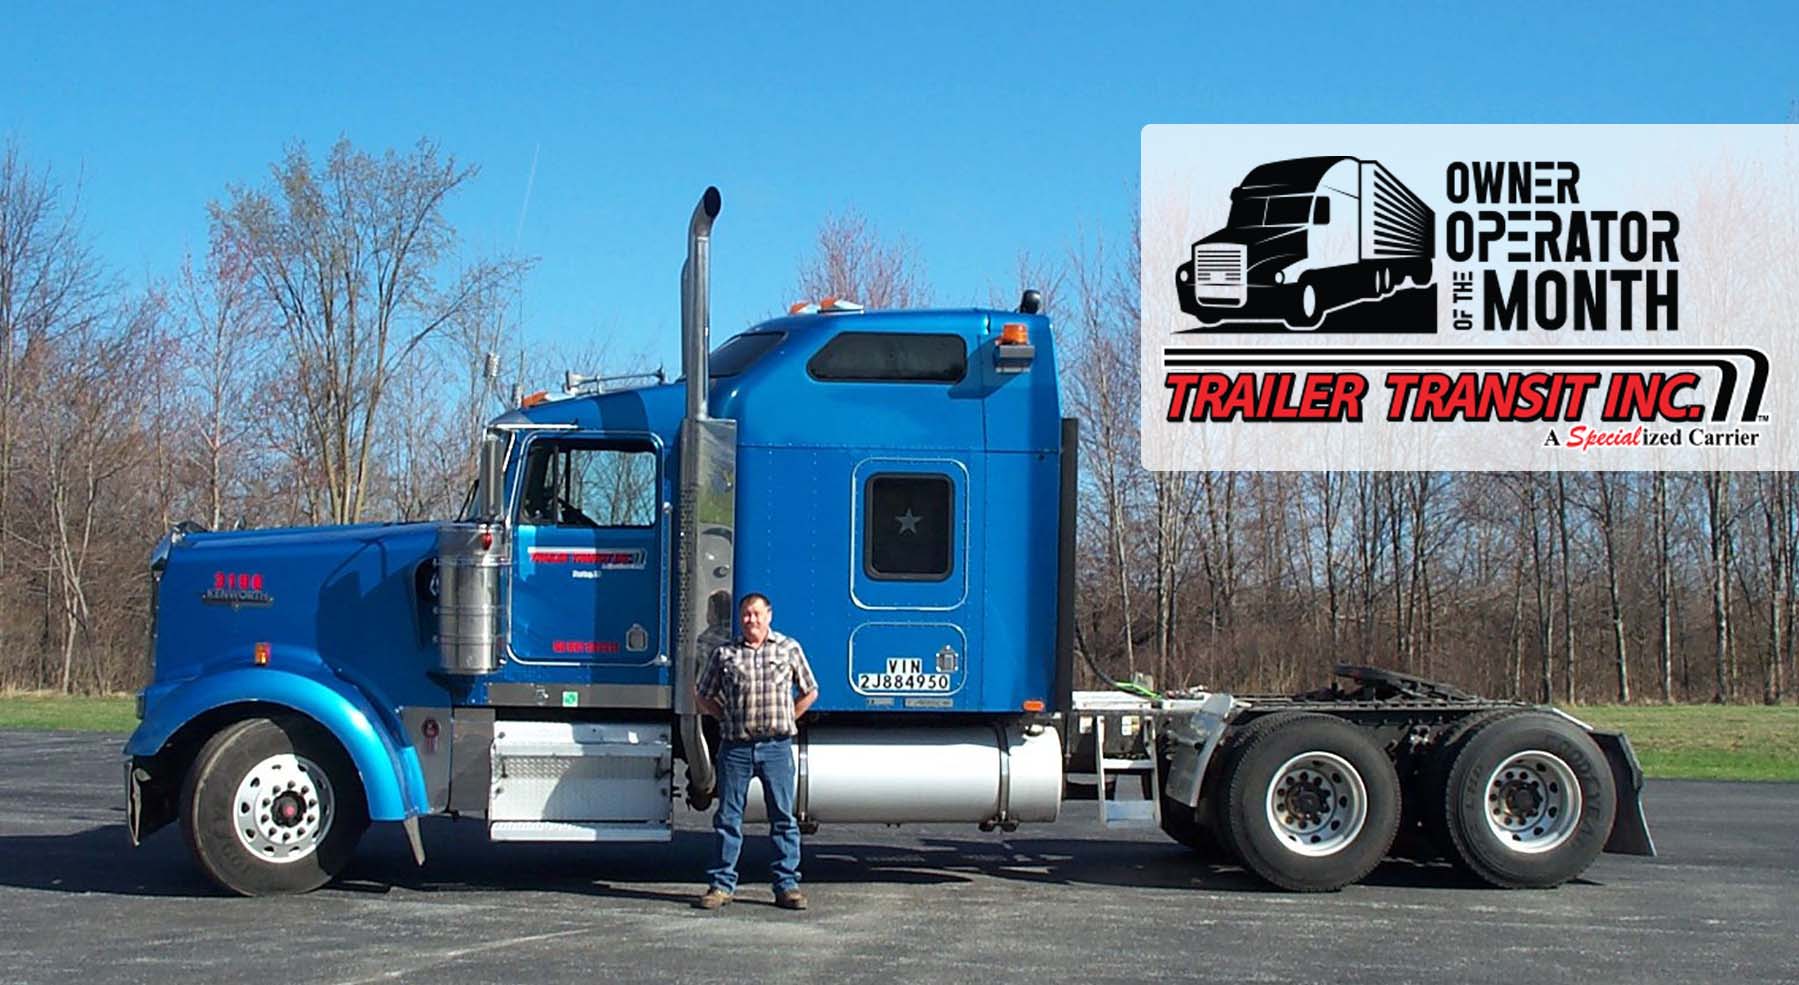 Trailer Transit Inc. | An award-winning owner operator of the month standing in front of a semi truck.